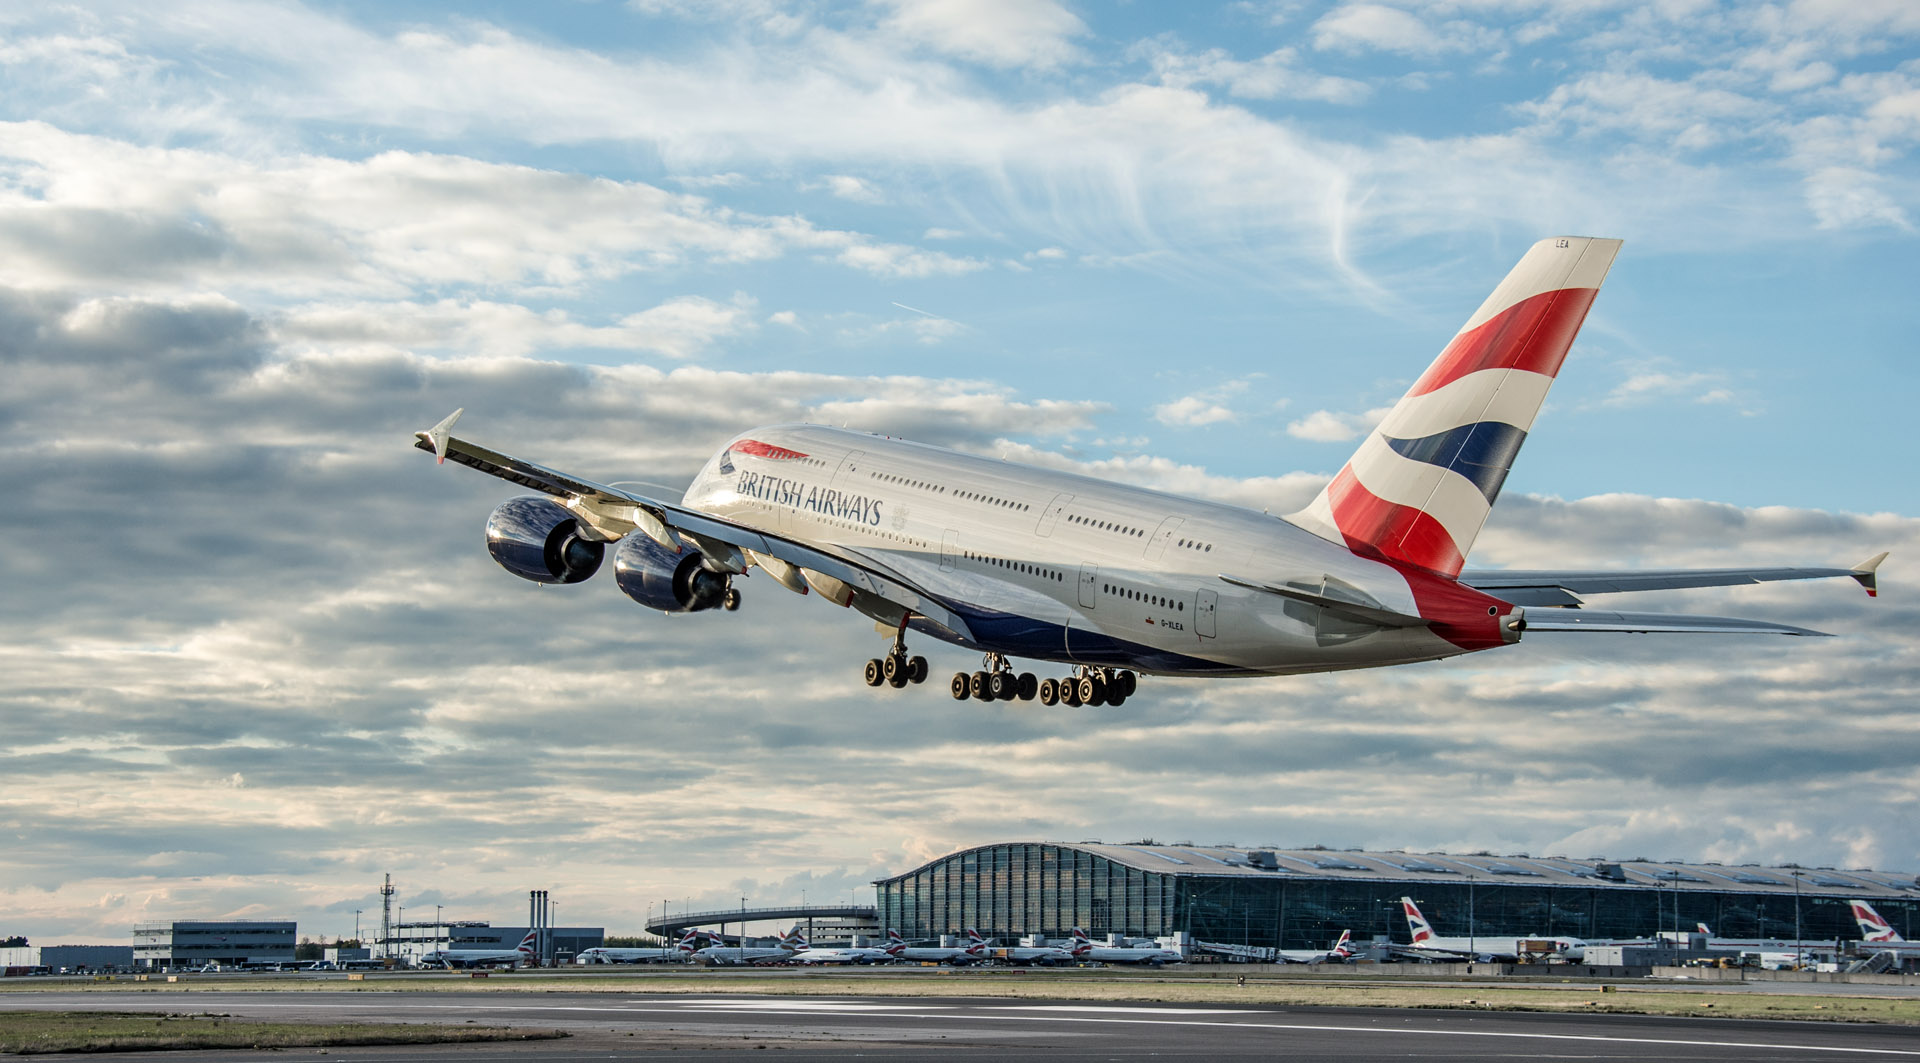 Photo: Heathrow Airport, British Airways Airbus A380 at take off, October 2013.